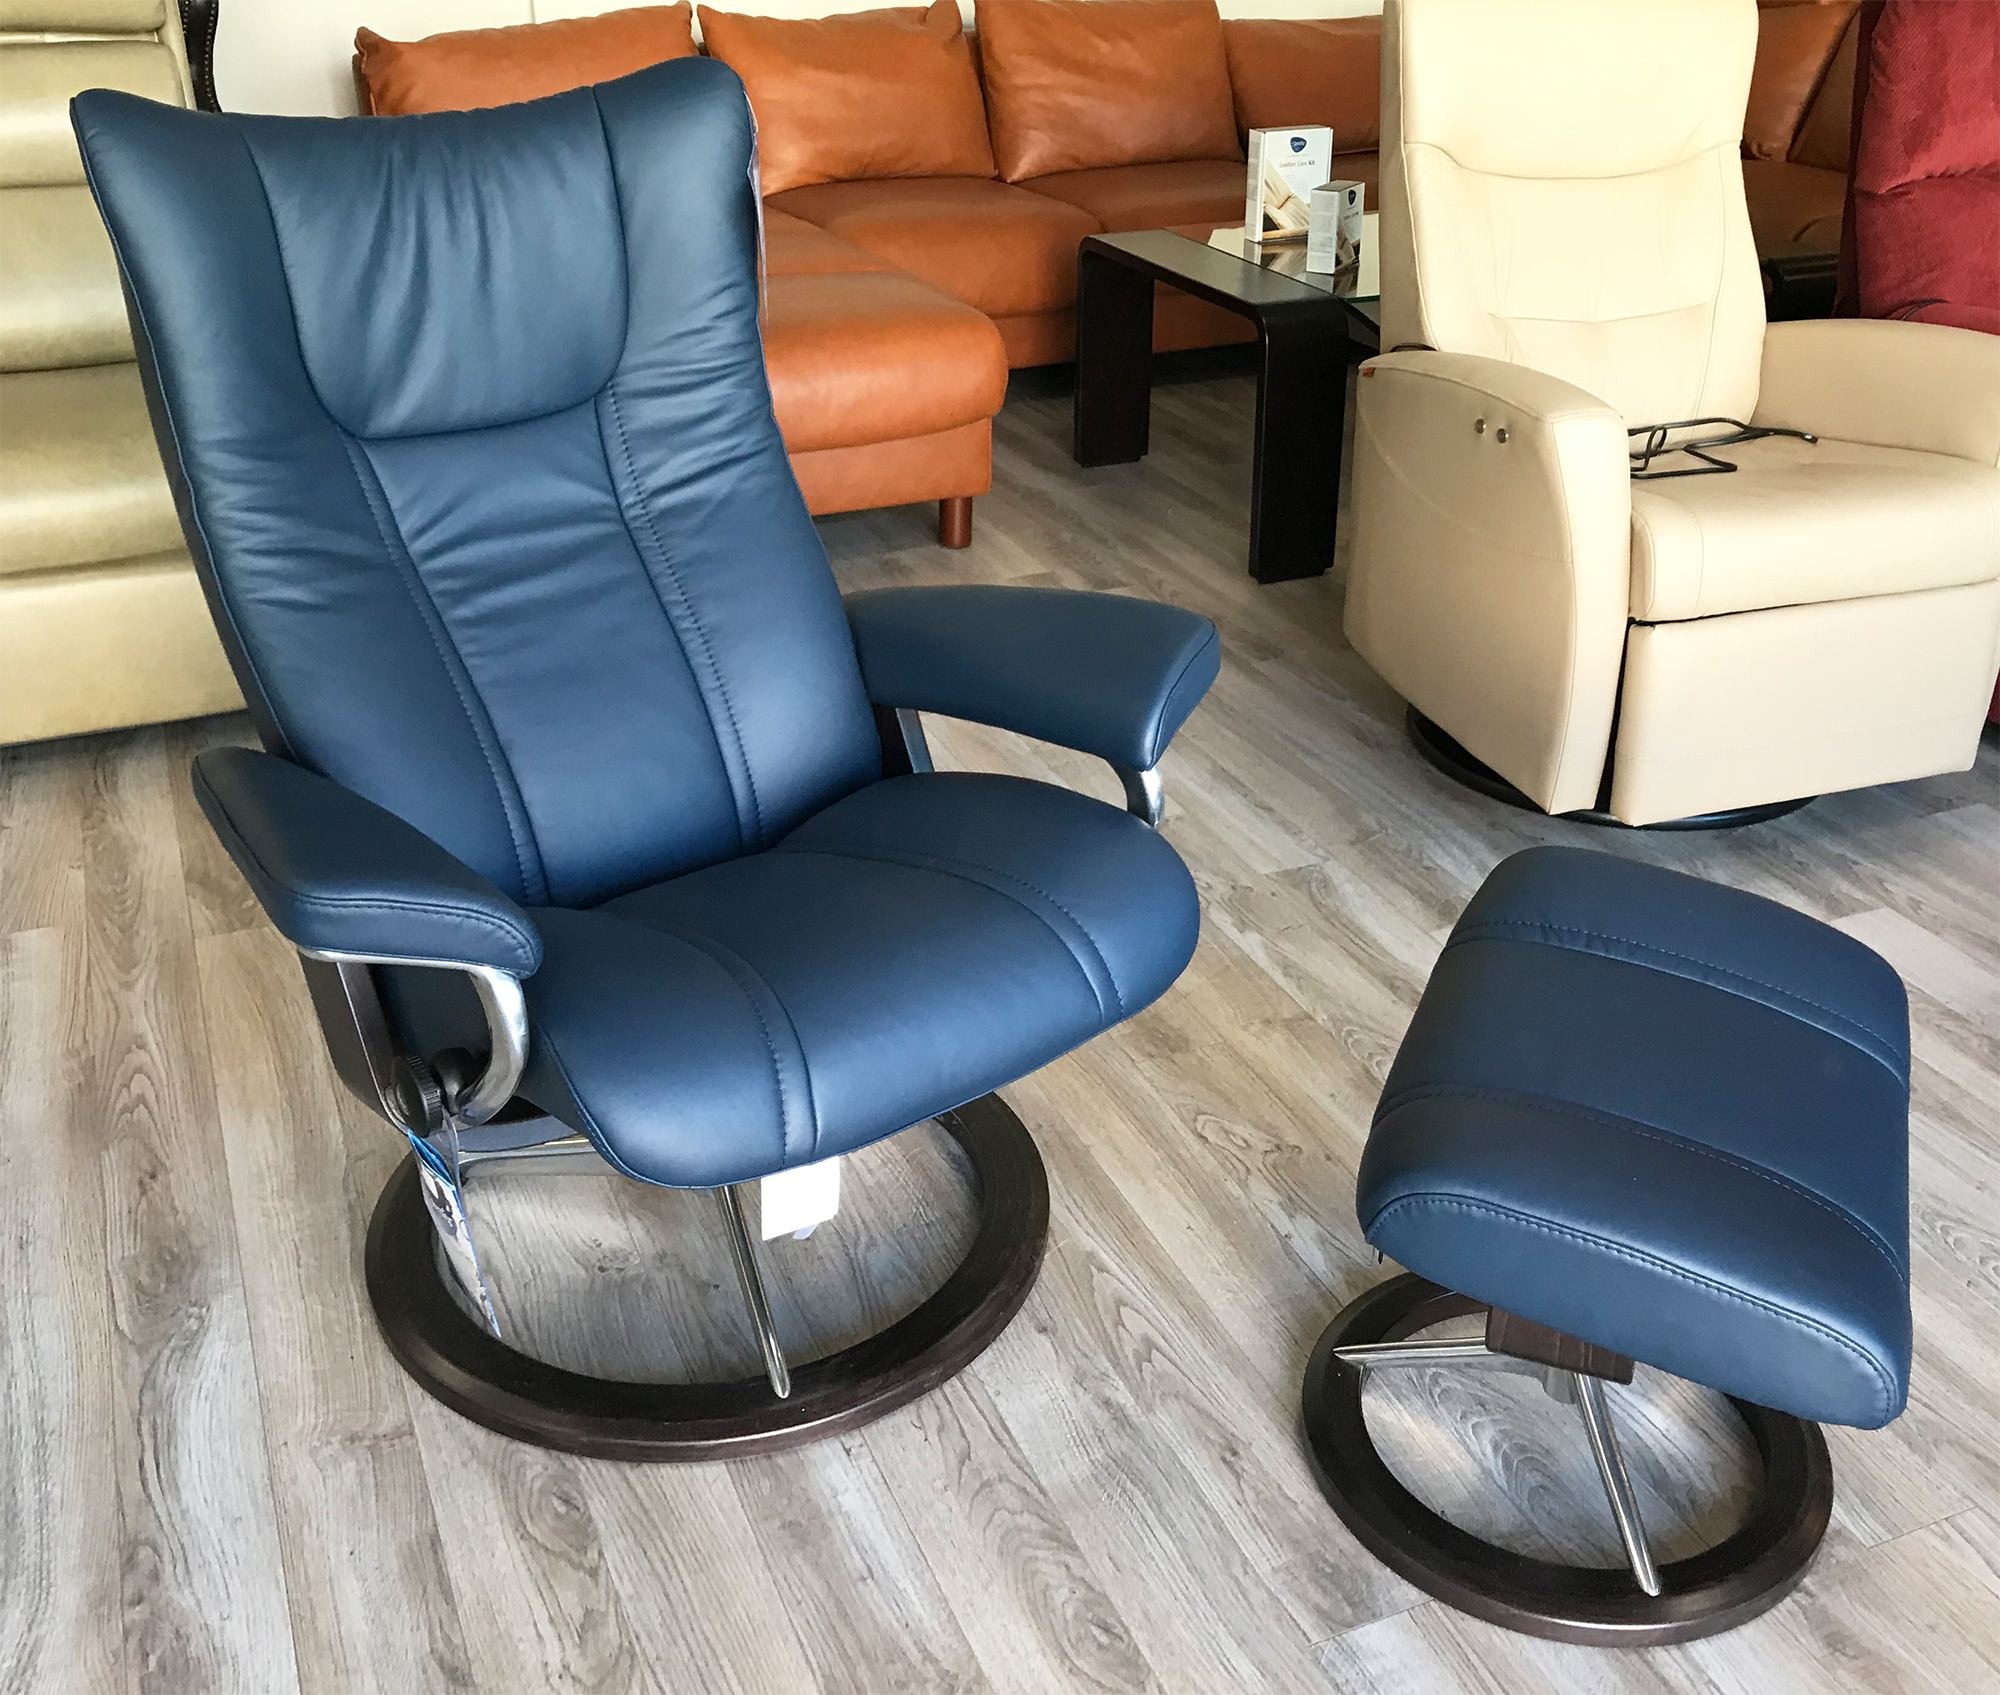 Stressless Wing Signature Base Paloma Oxford Blue Leather Recliner Chair and Ottoman by Ekornes